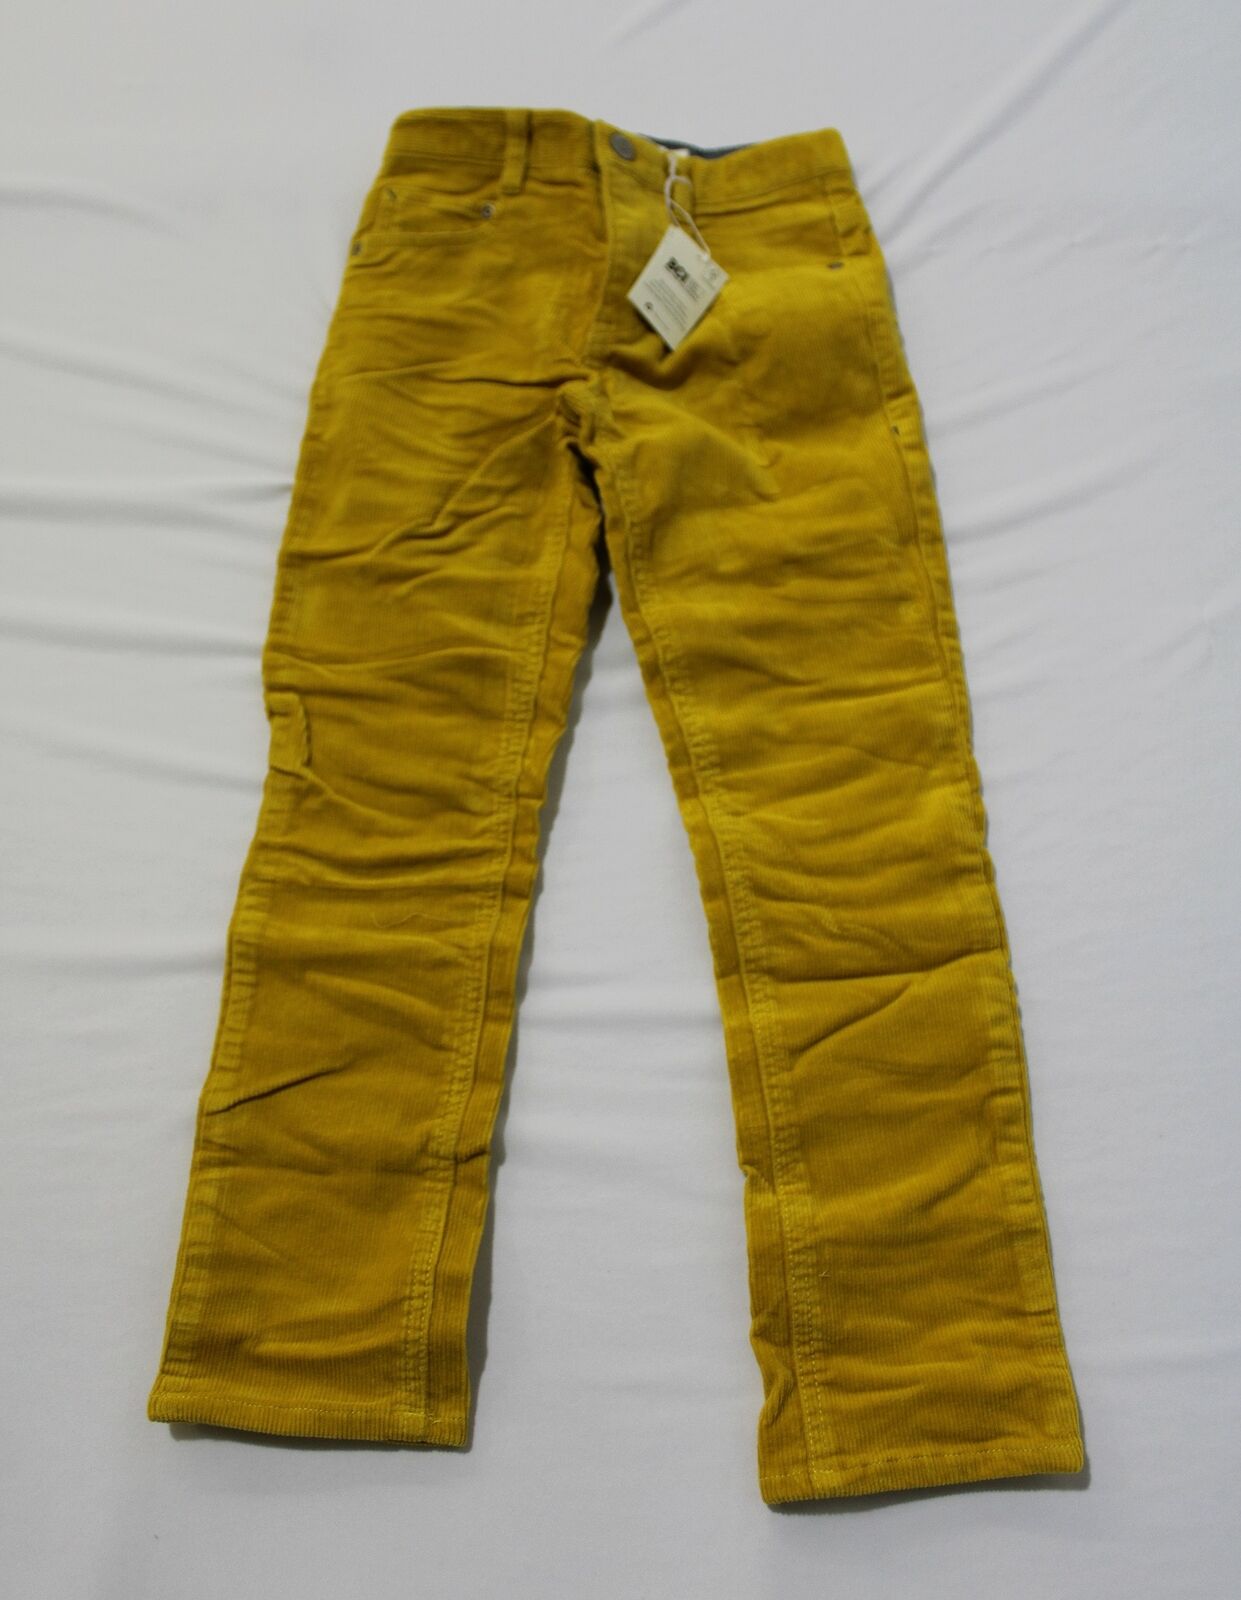 Boden Girl's Slim Cord Stretch Pants CD4 Honeycomb Yellow Size 7